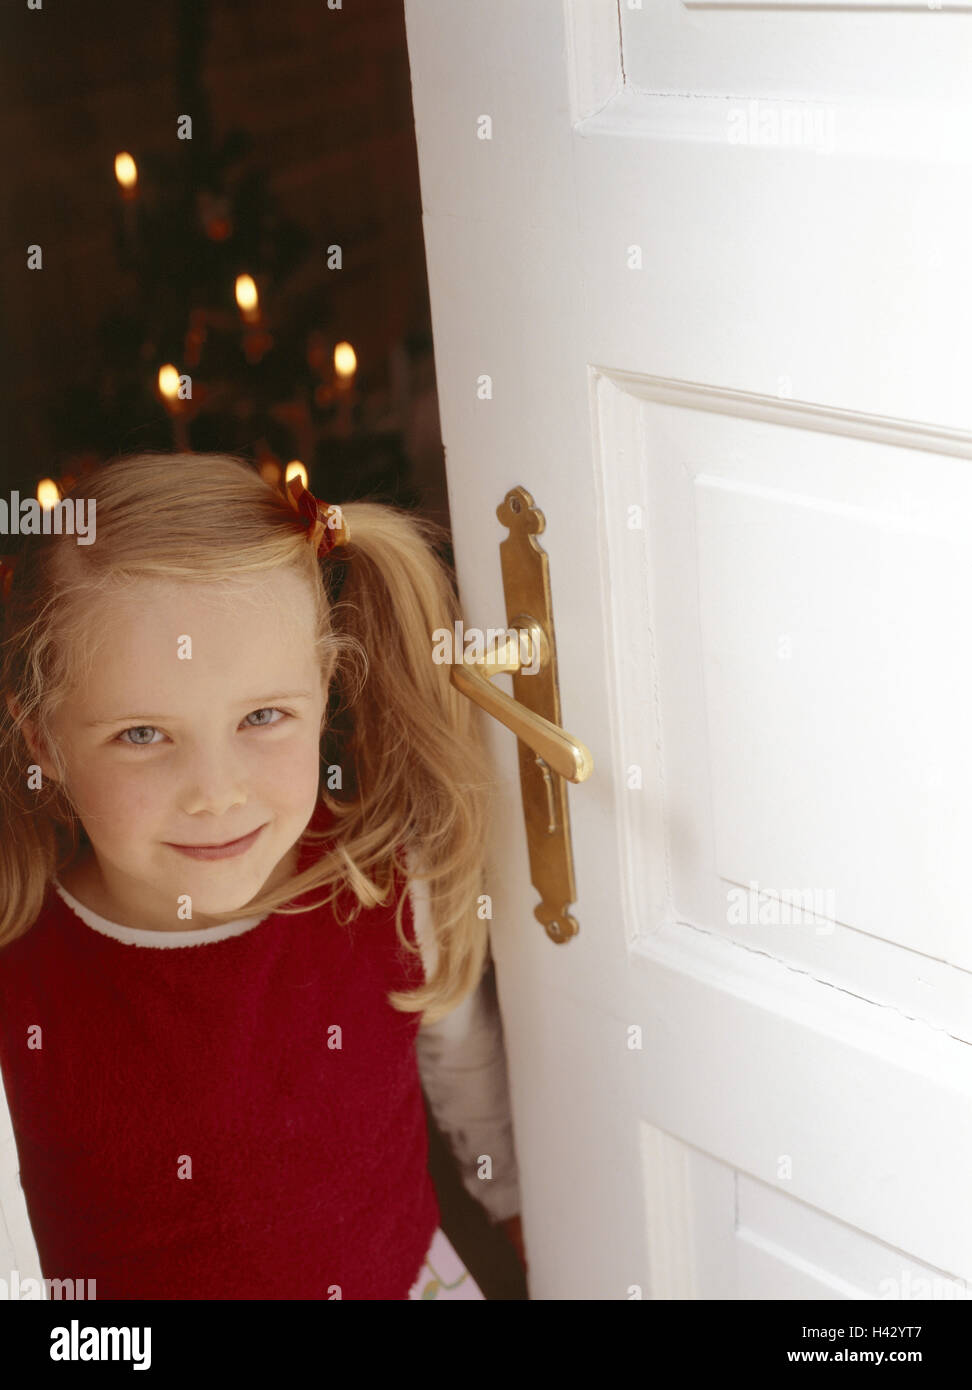 Christmas,Christmas Eve,Christmas tree,blond,child,childhood,door,expectation,girl,lighthearted,living room,open,prejoy,smile,tension,x-mas,yule tide Stock Photo